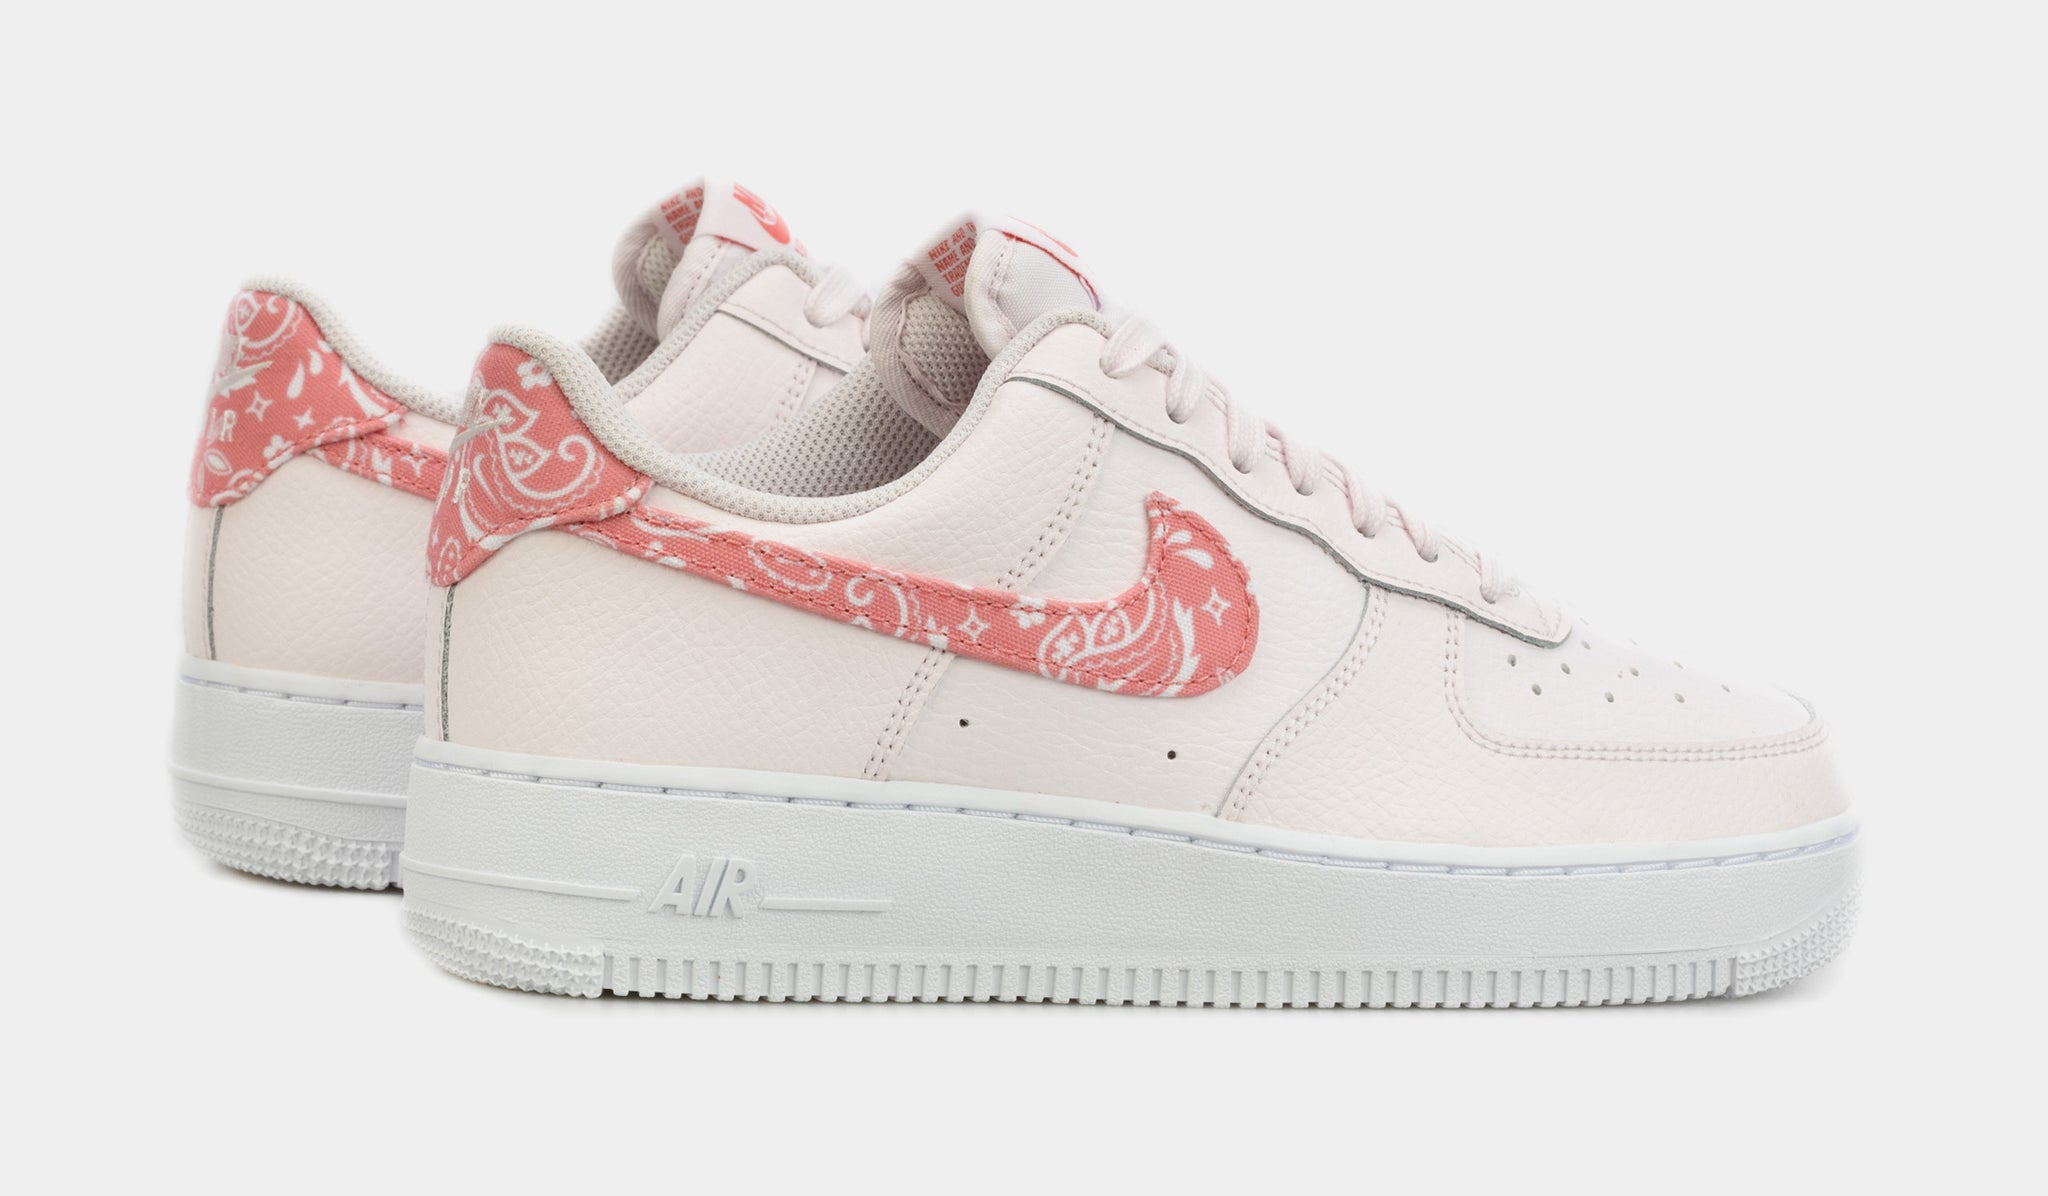 Nike Air Force 1 '07 Pink Paisley Womens Lifestyle Shoes Pink FD1448-664 –  Shoe Palace